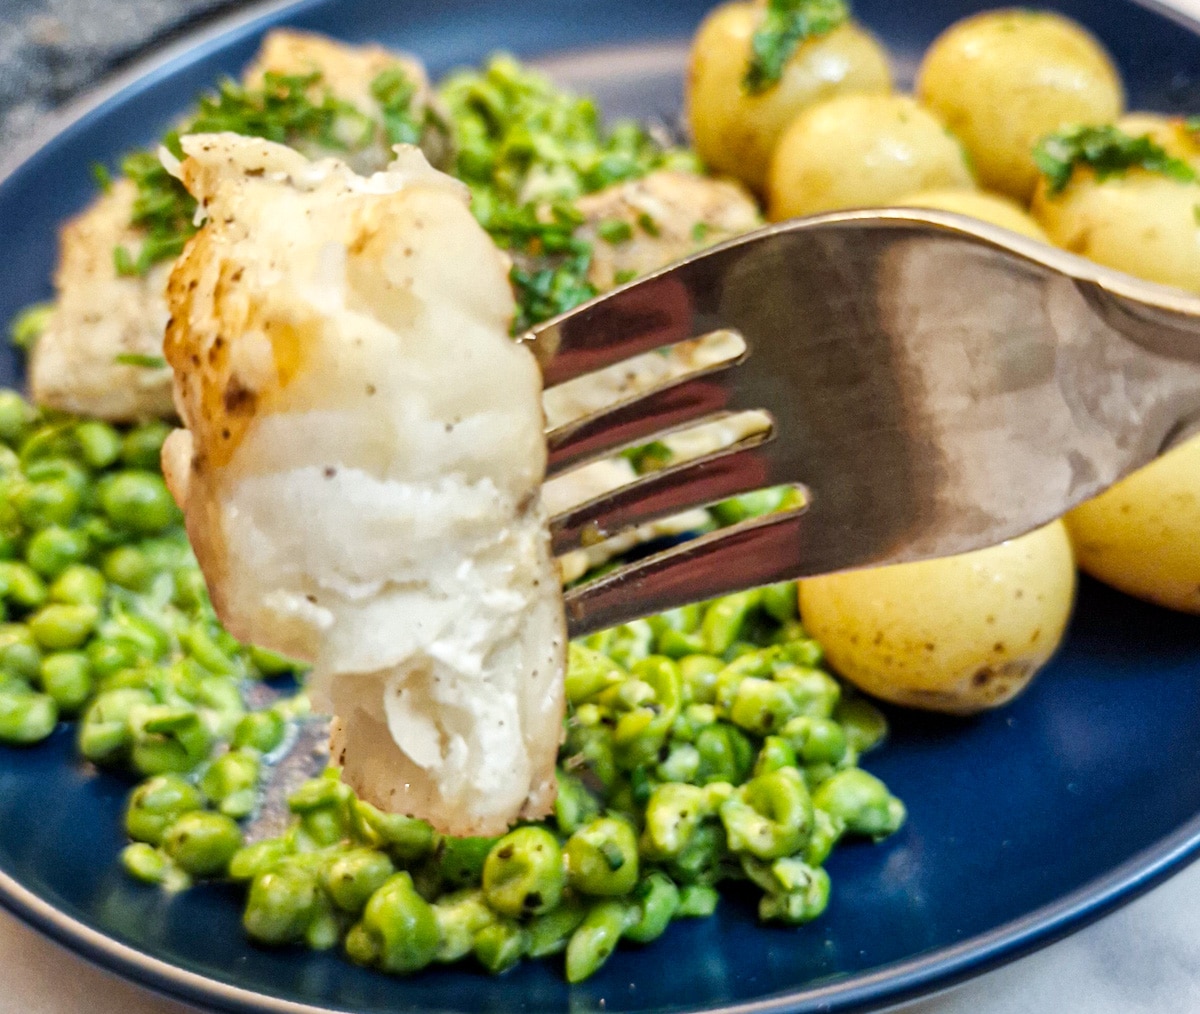 Close up of a piece of monkfish on a fork with a plate of peas and potatoes in the background.